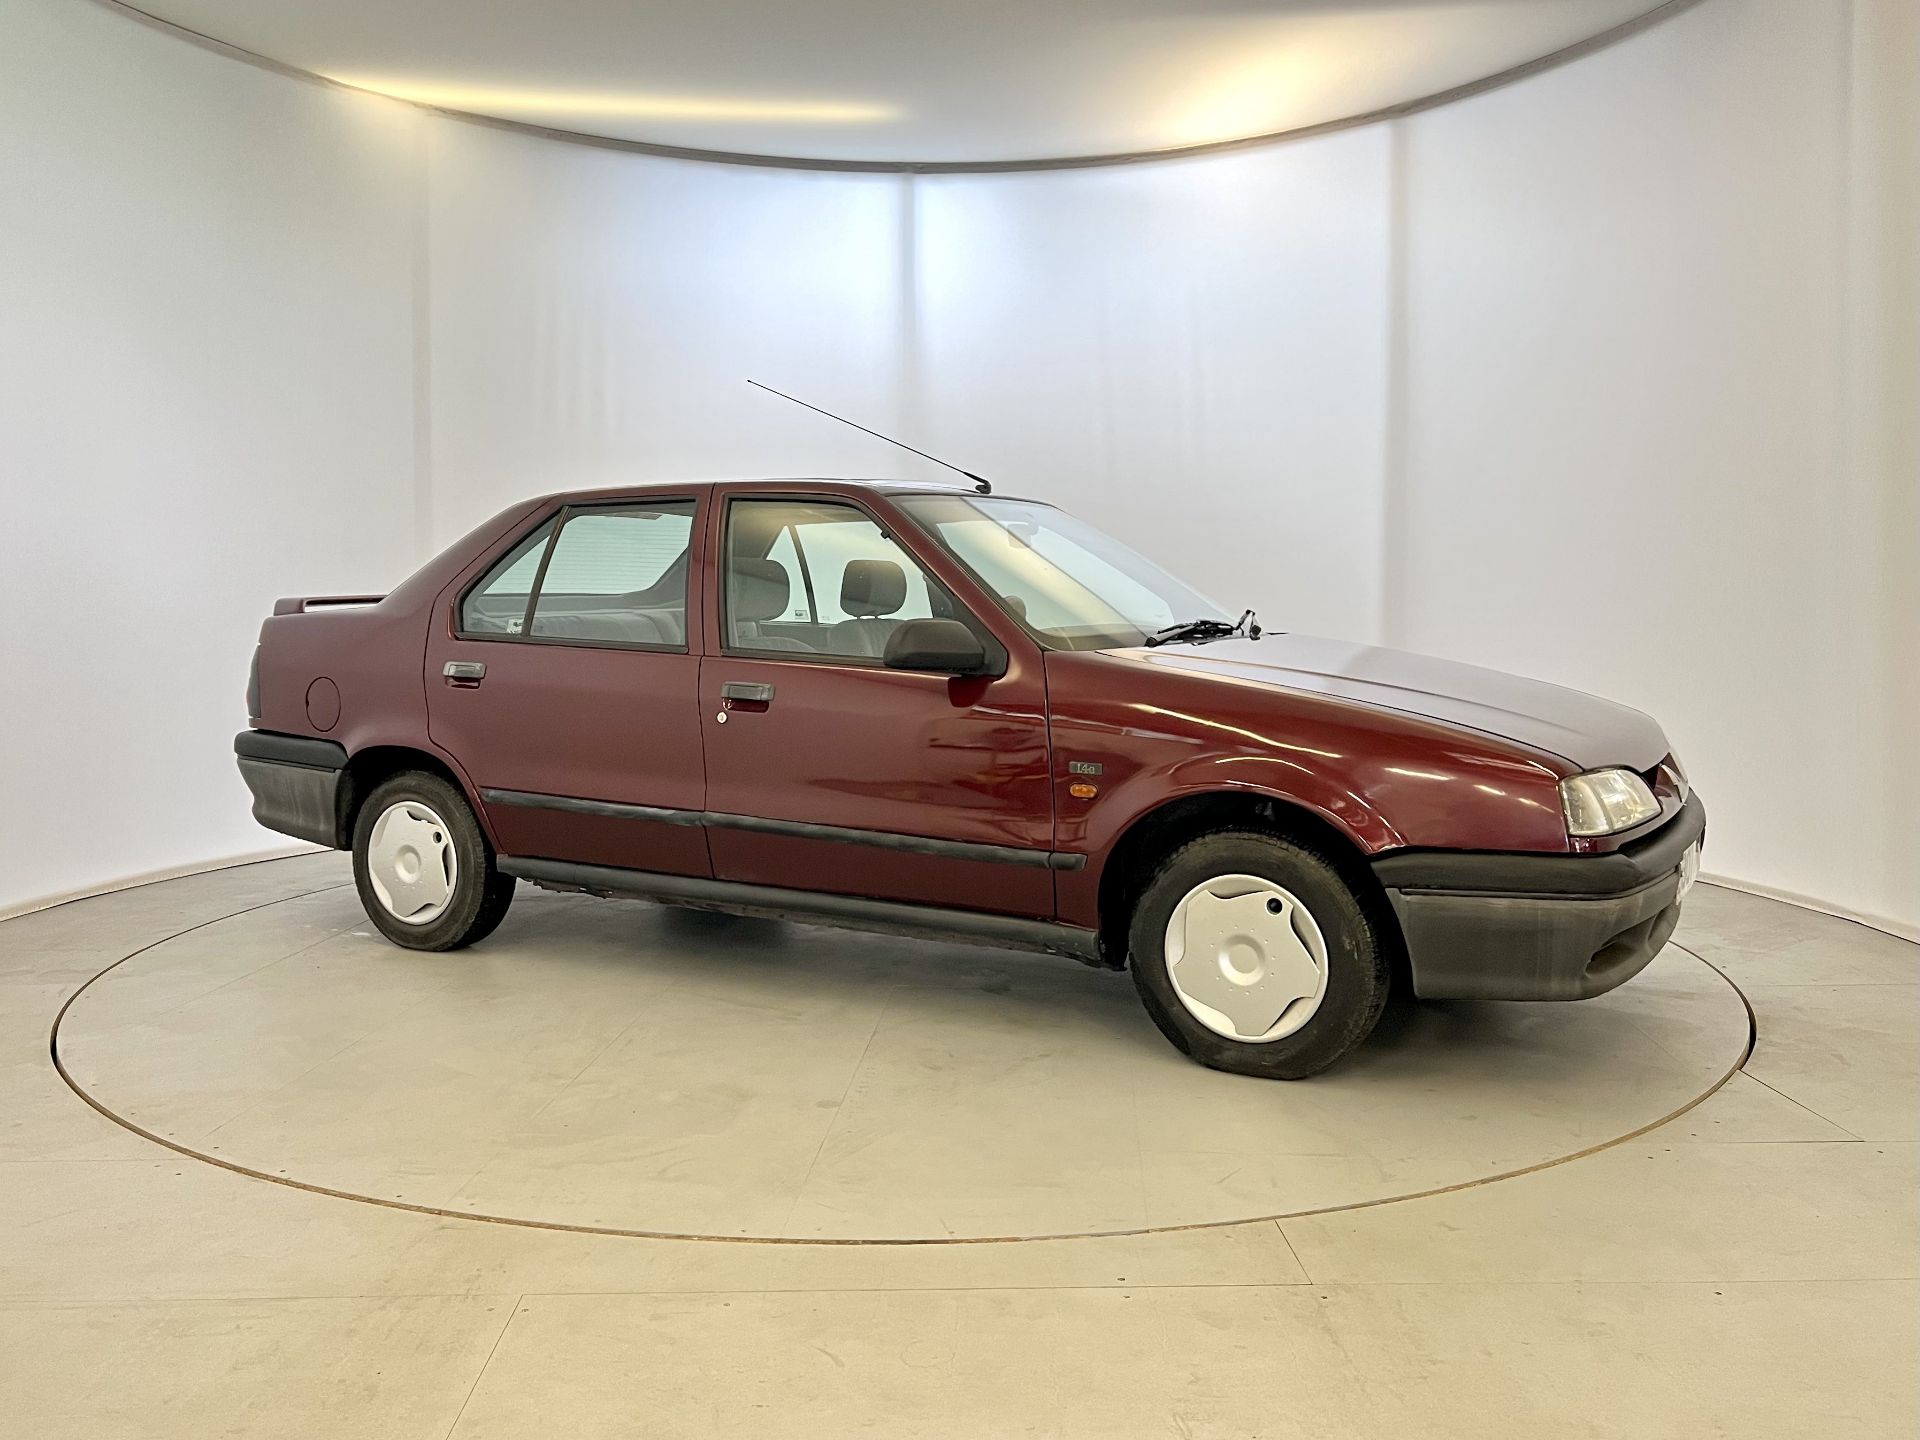 Renault 19 - Image 12 of 38